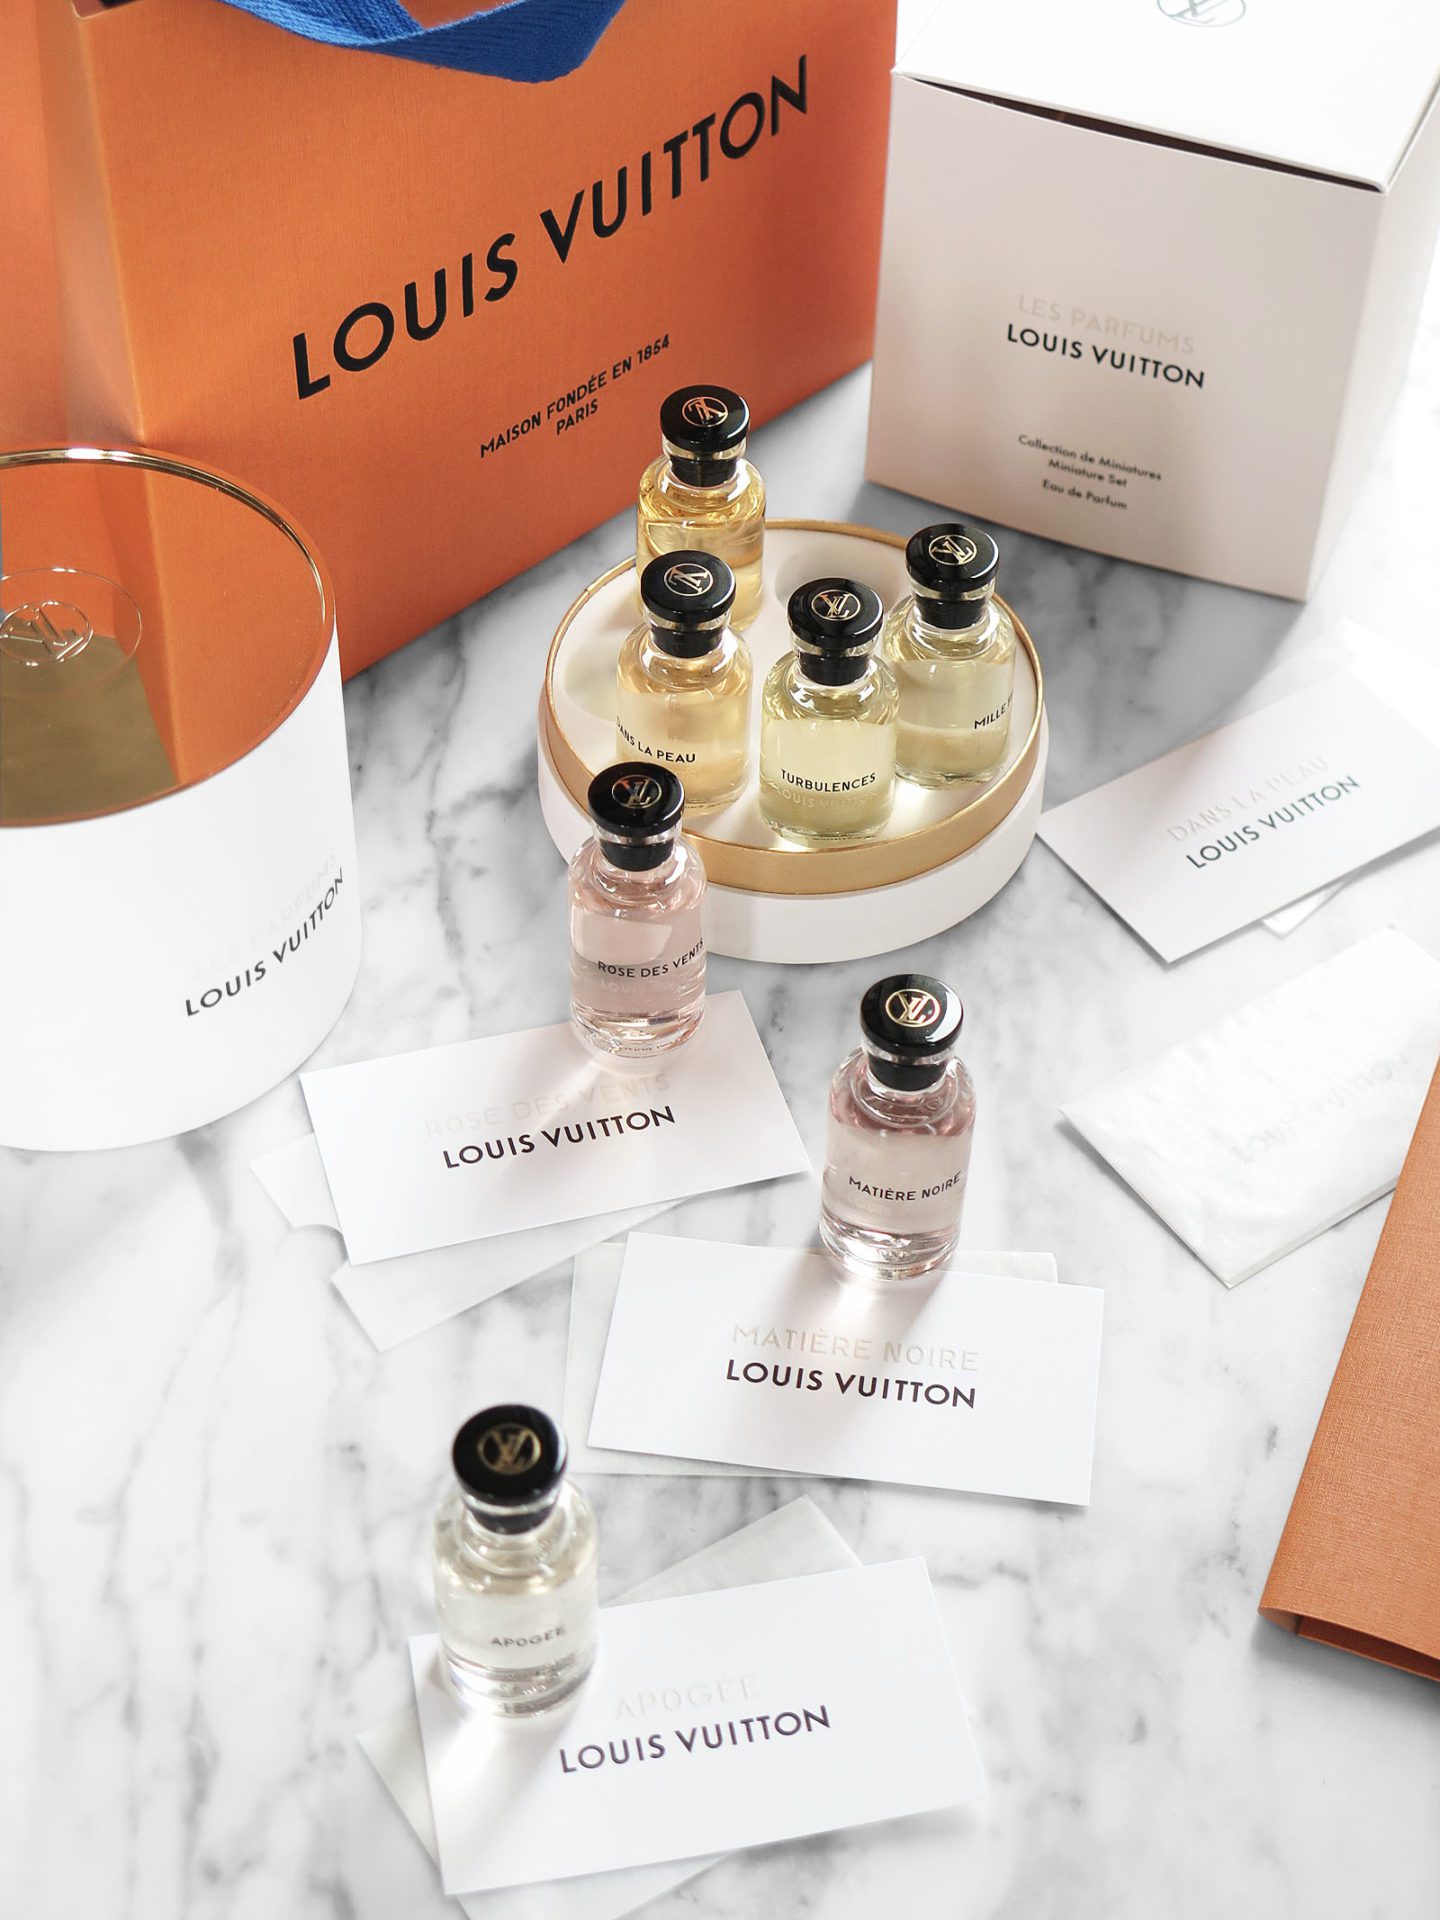 Louis Vuitton Perfume Samples And Small Shopping Bag